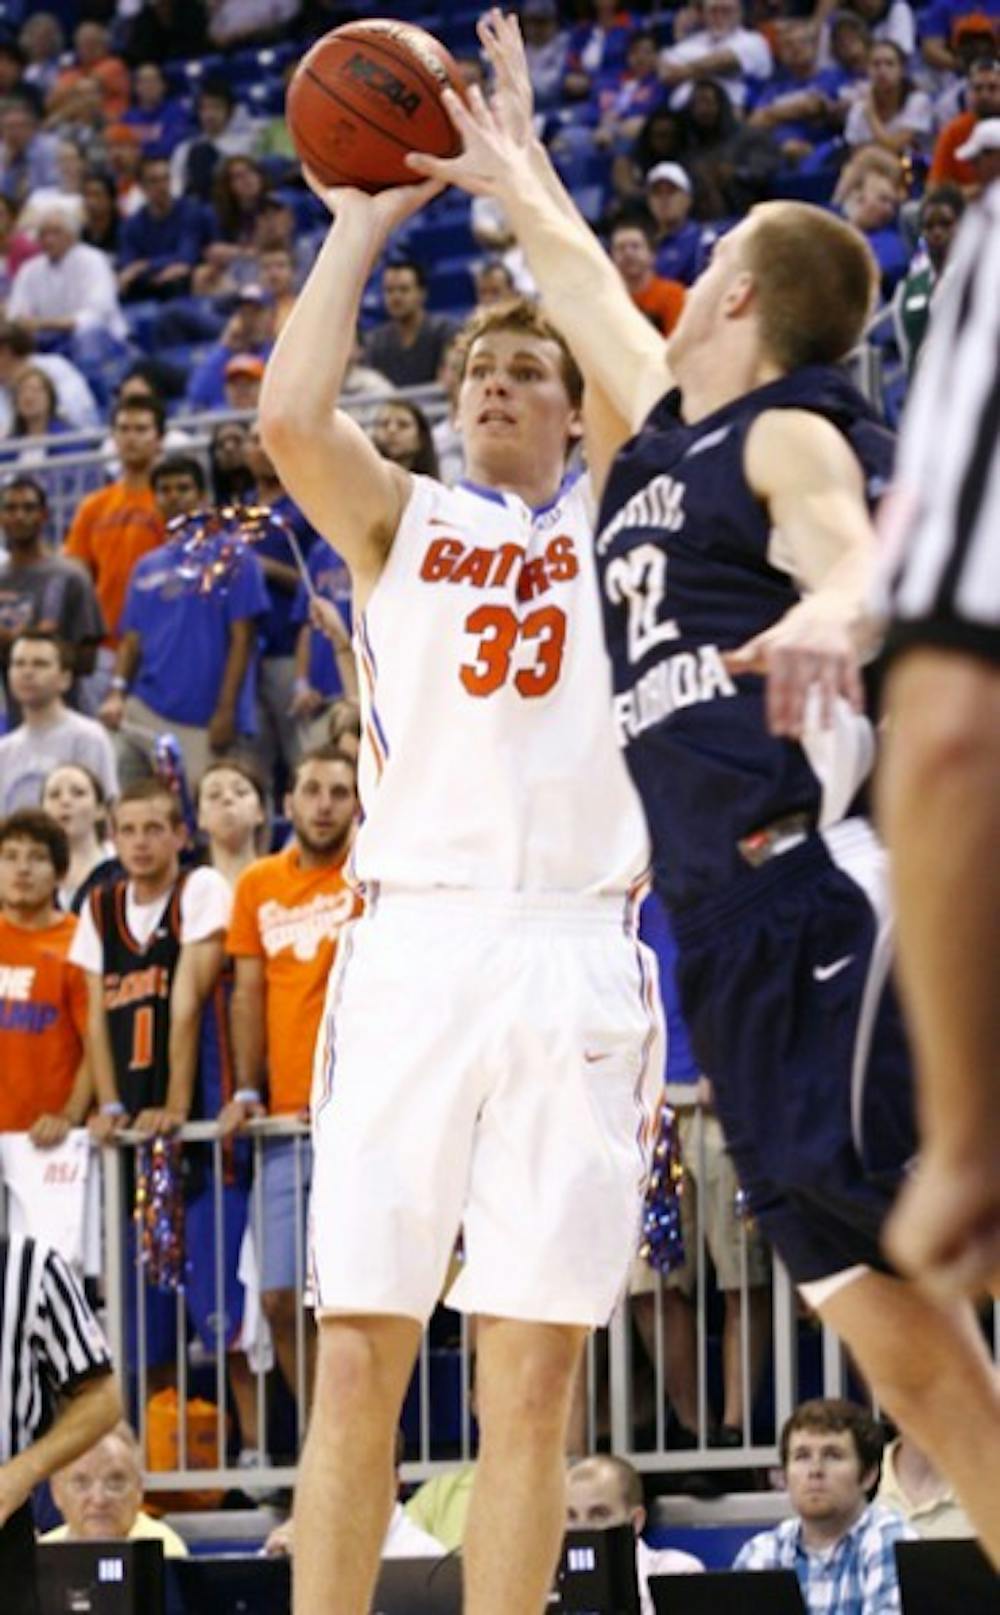 <p>When he’s on the floor, Florida forward Erik Murphy is a threat from outside for the Gators. Murphy, a junior, made 40 percent on 30 attempts from three last season, which was a team-high mark.</p>